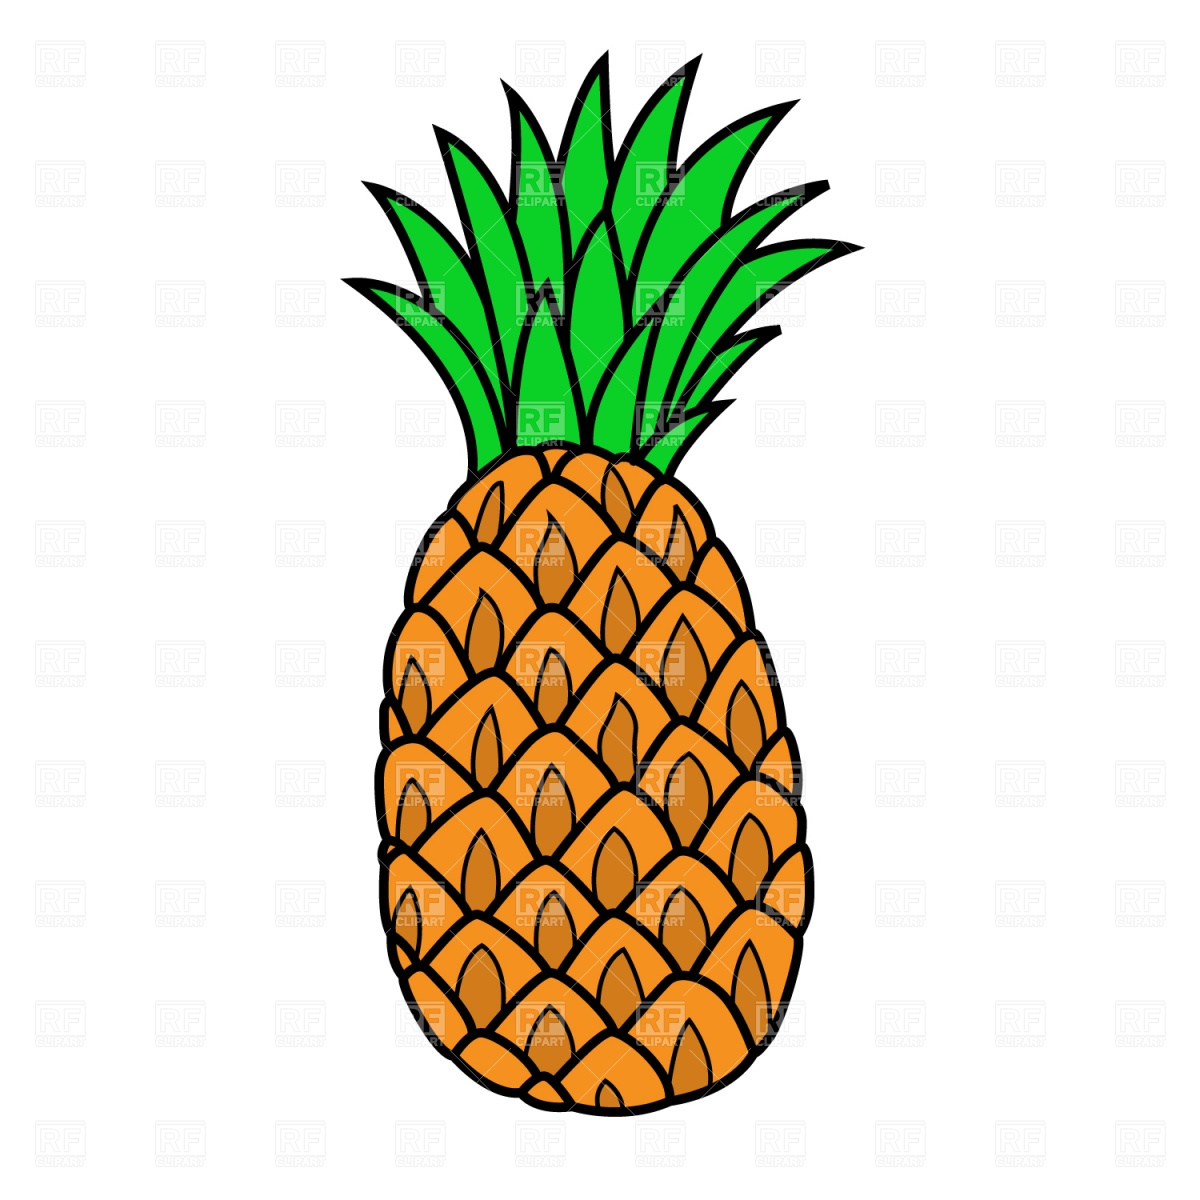 Cartoon Pineapple Clipart - Cliparts and Others Art Inspiration